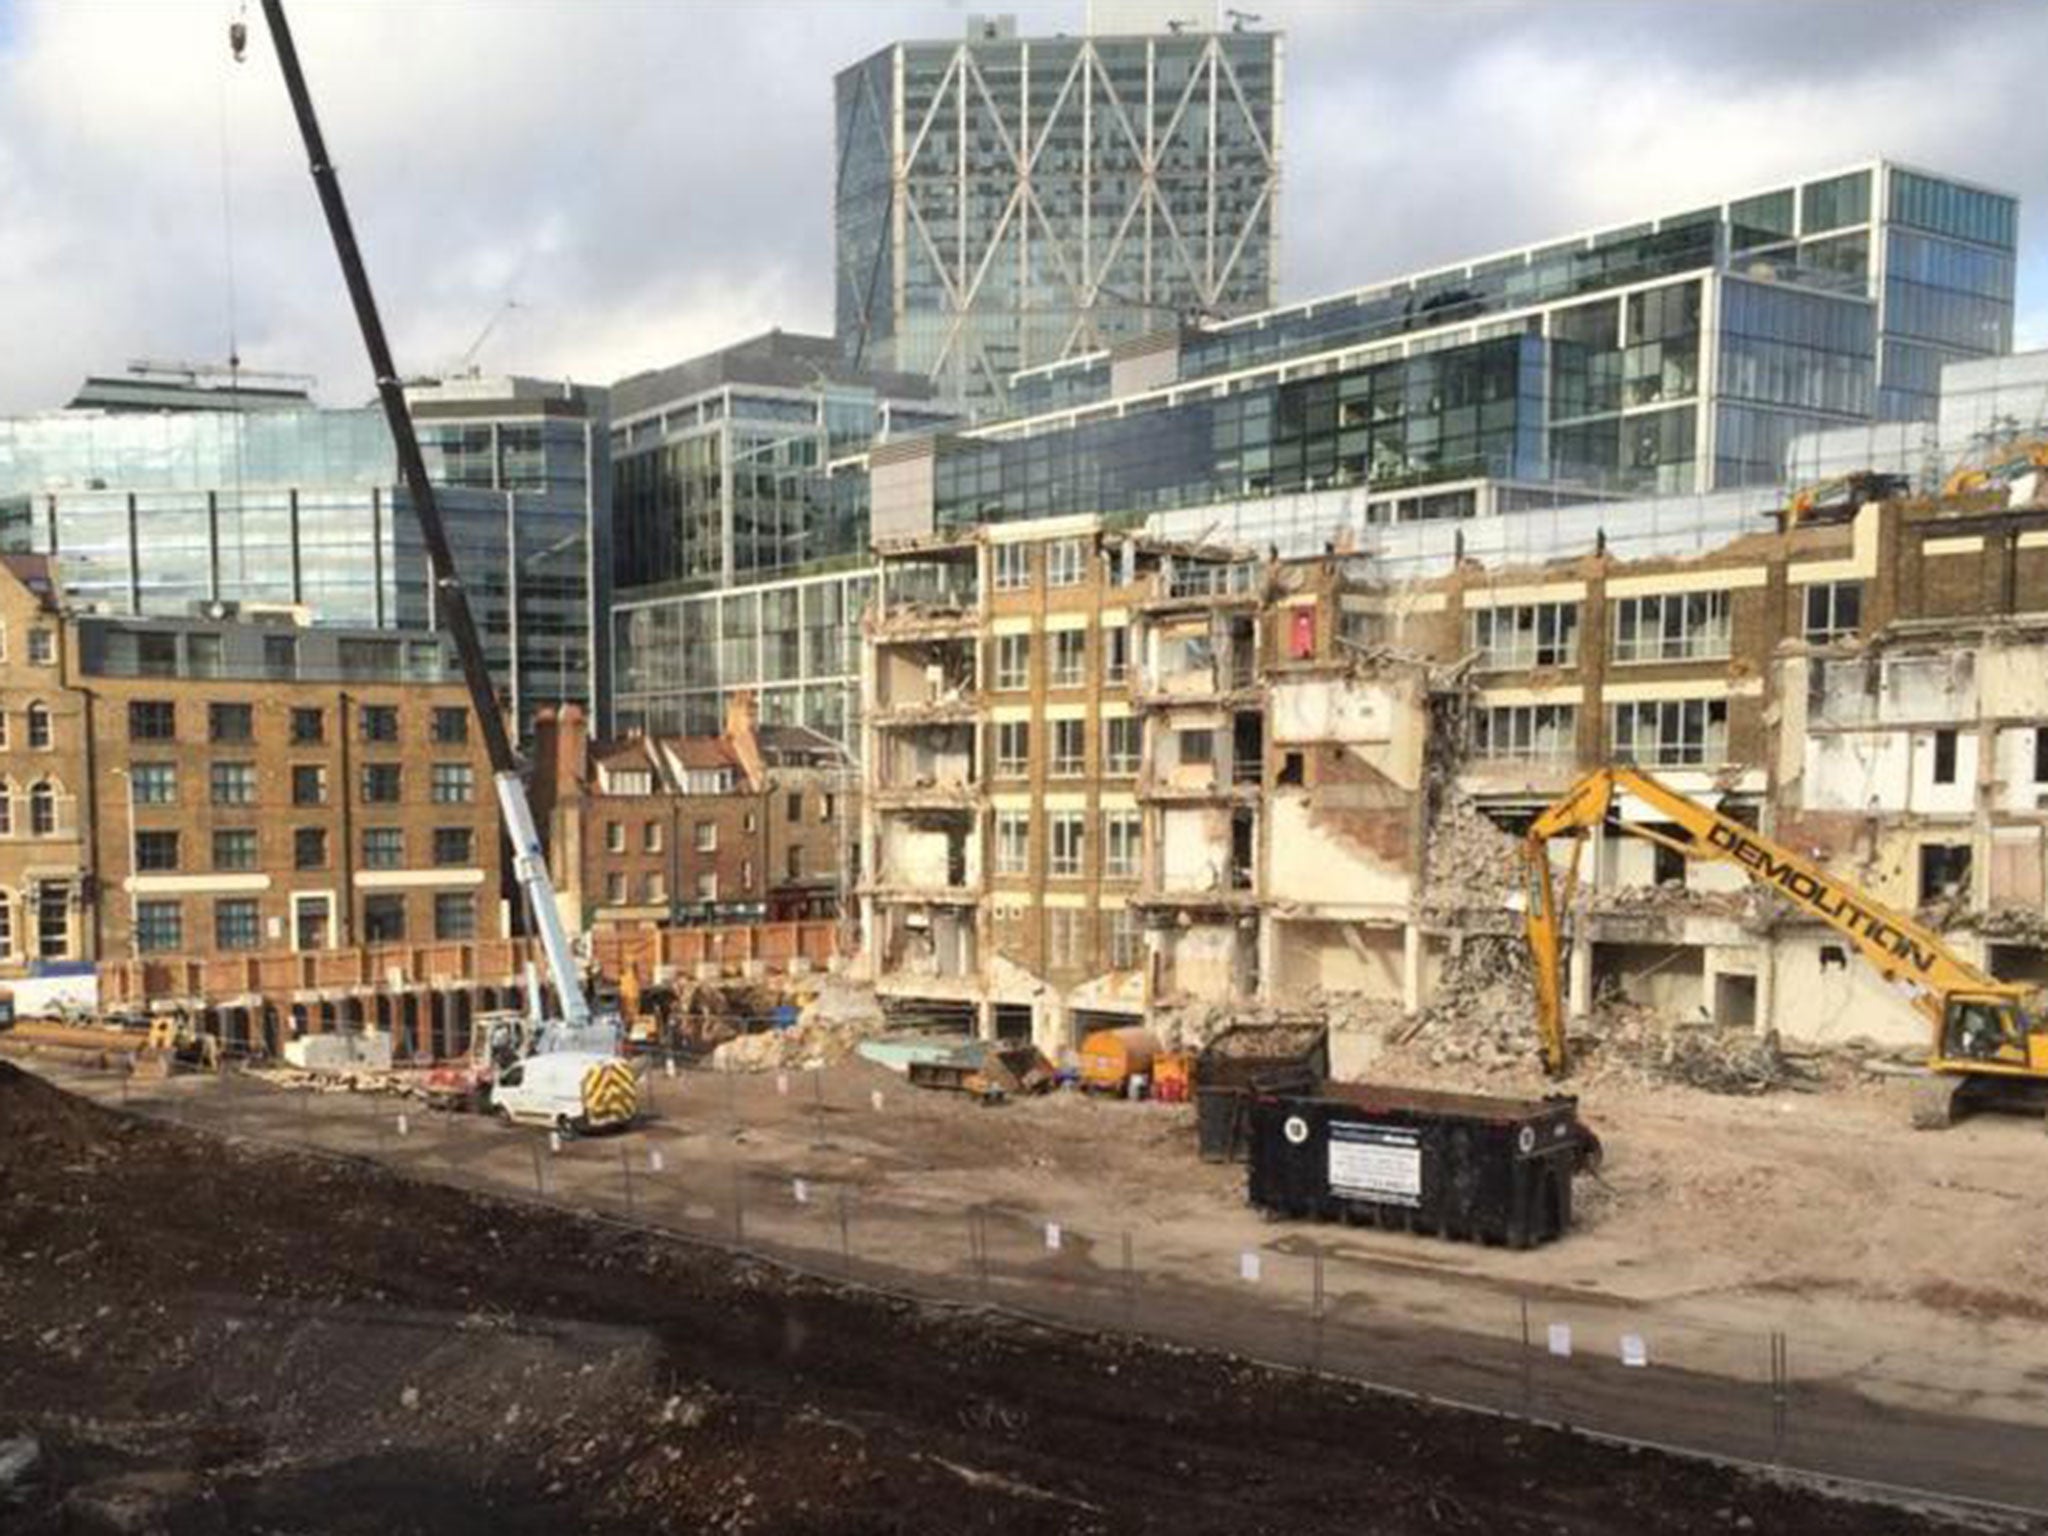   The bomb was found on a construction site in Spitalfields, east London